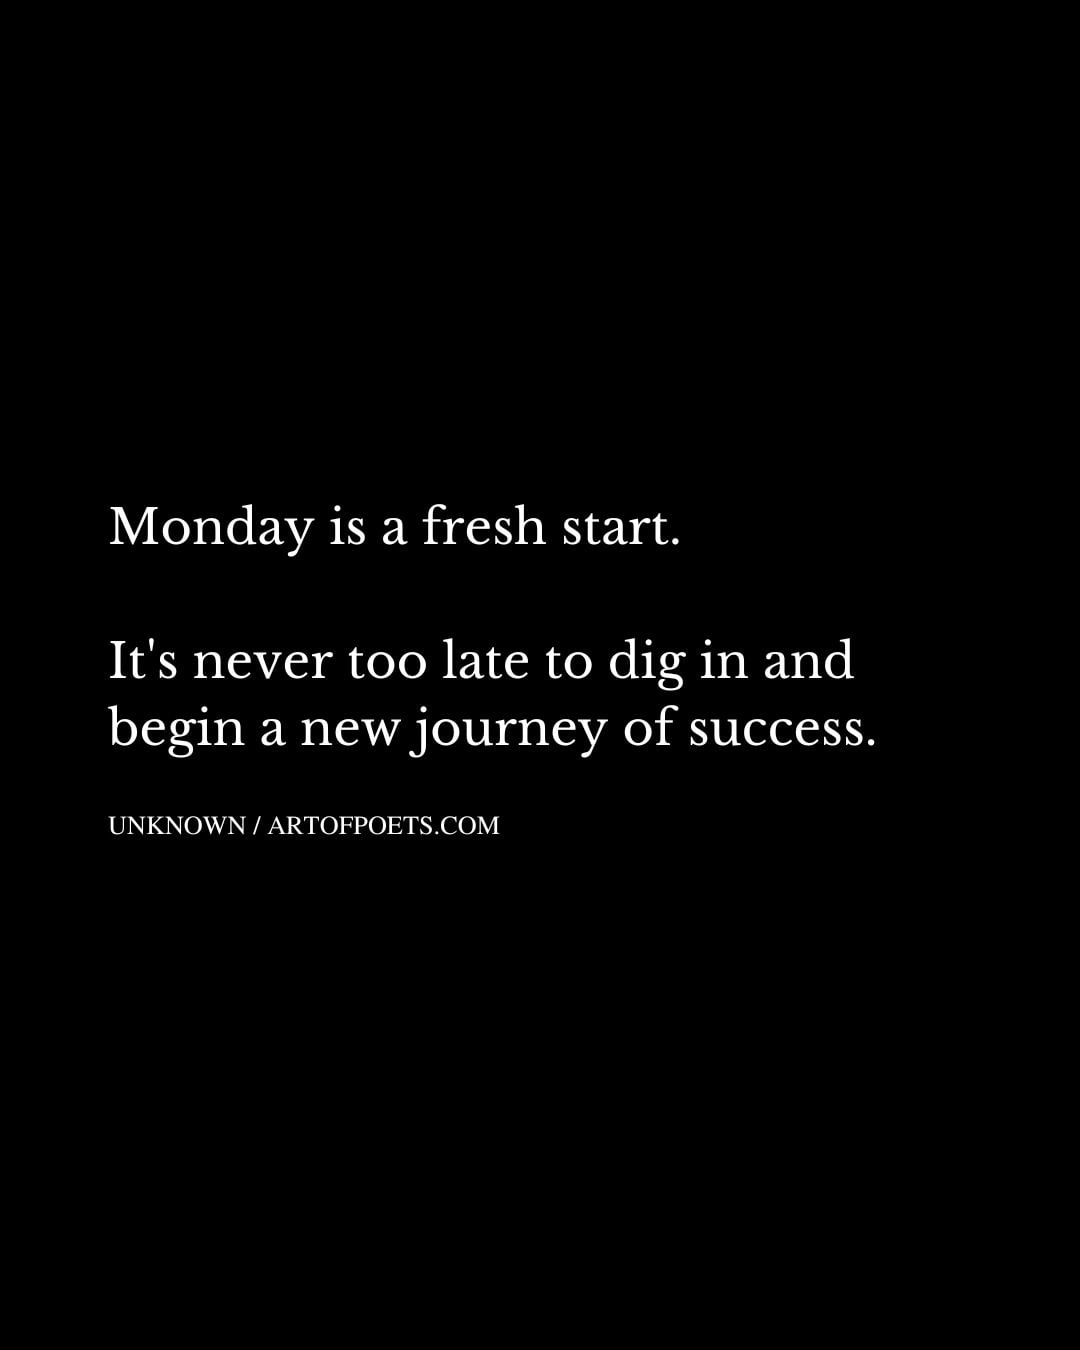 Monday is a fresh start. Its never too late to dig in and begin a new journey of success